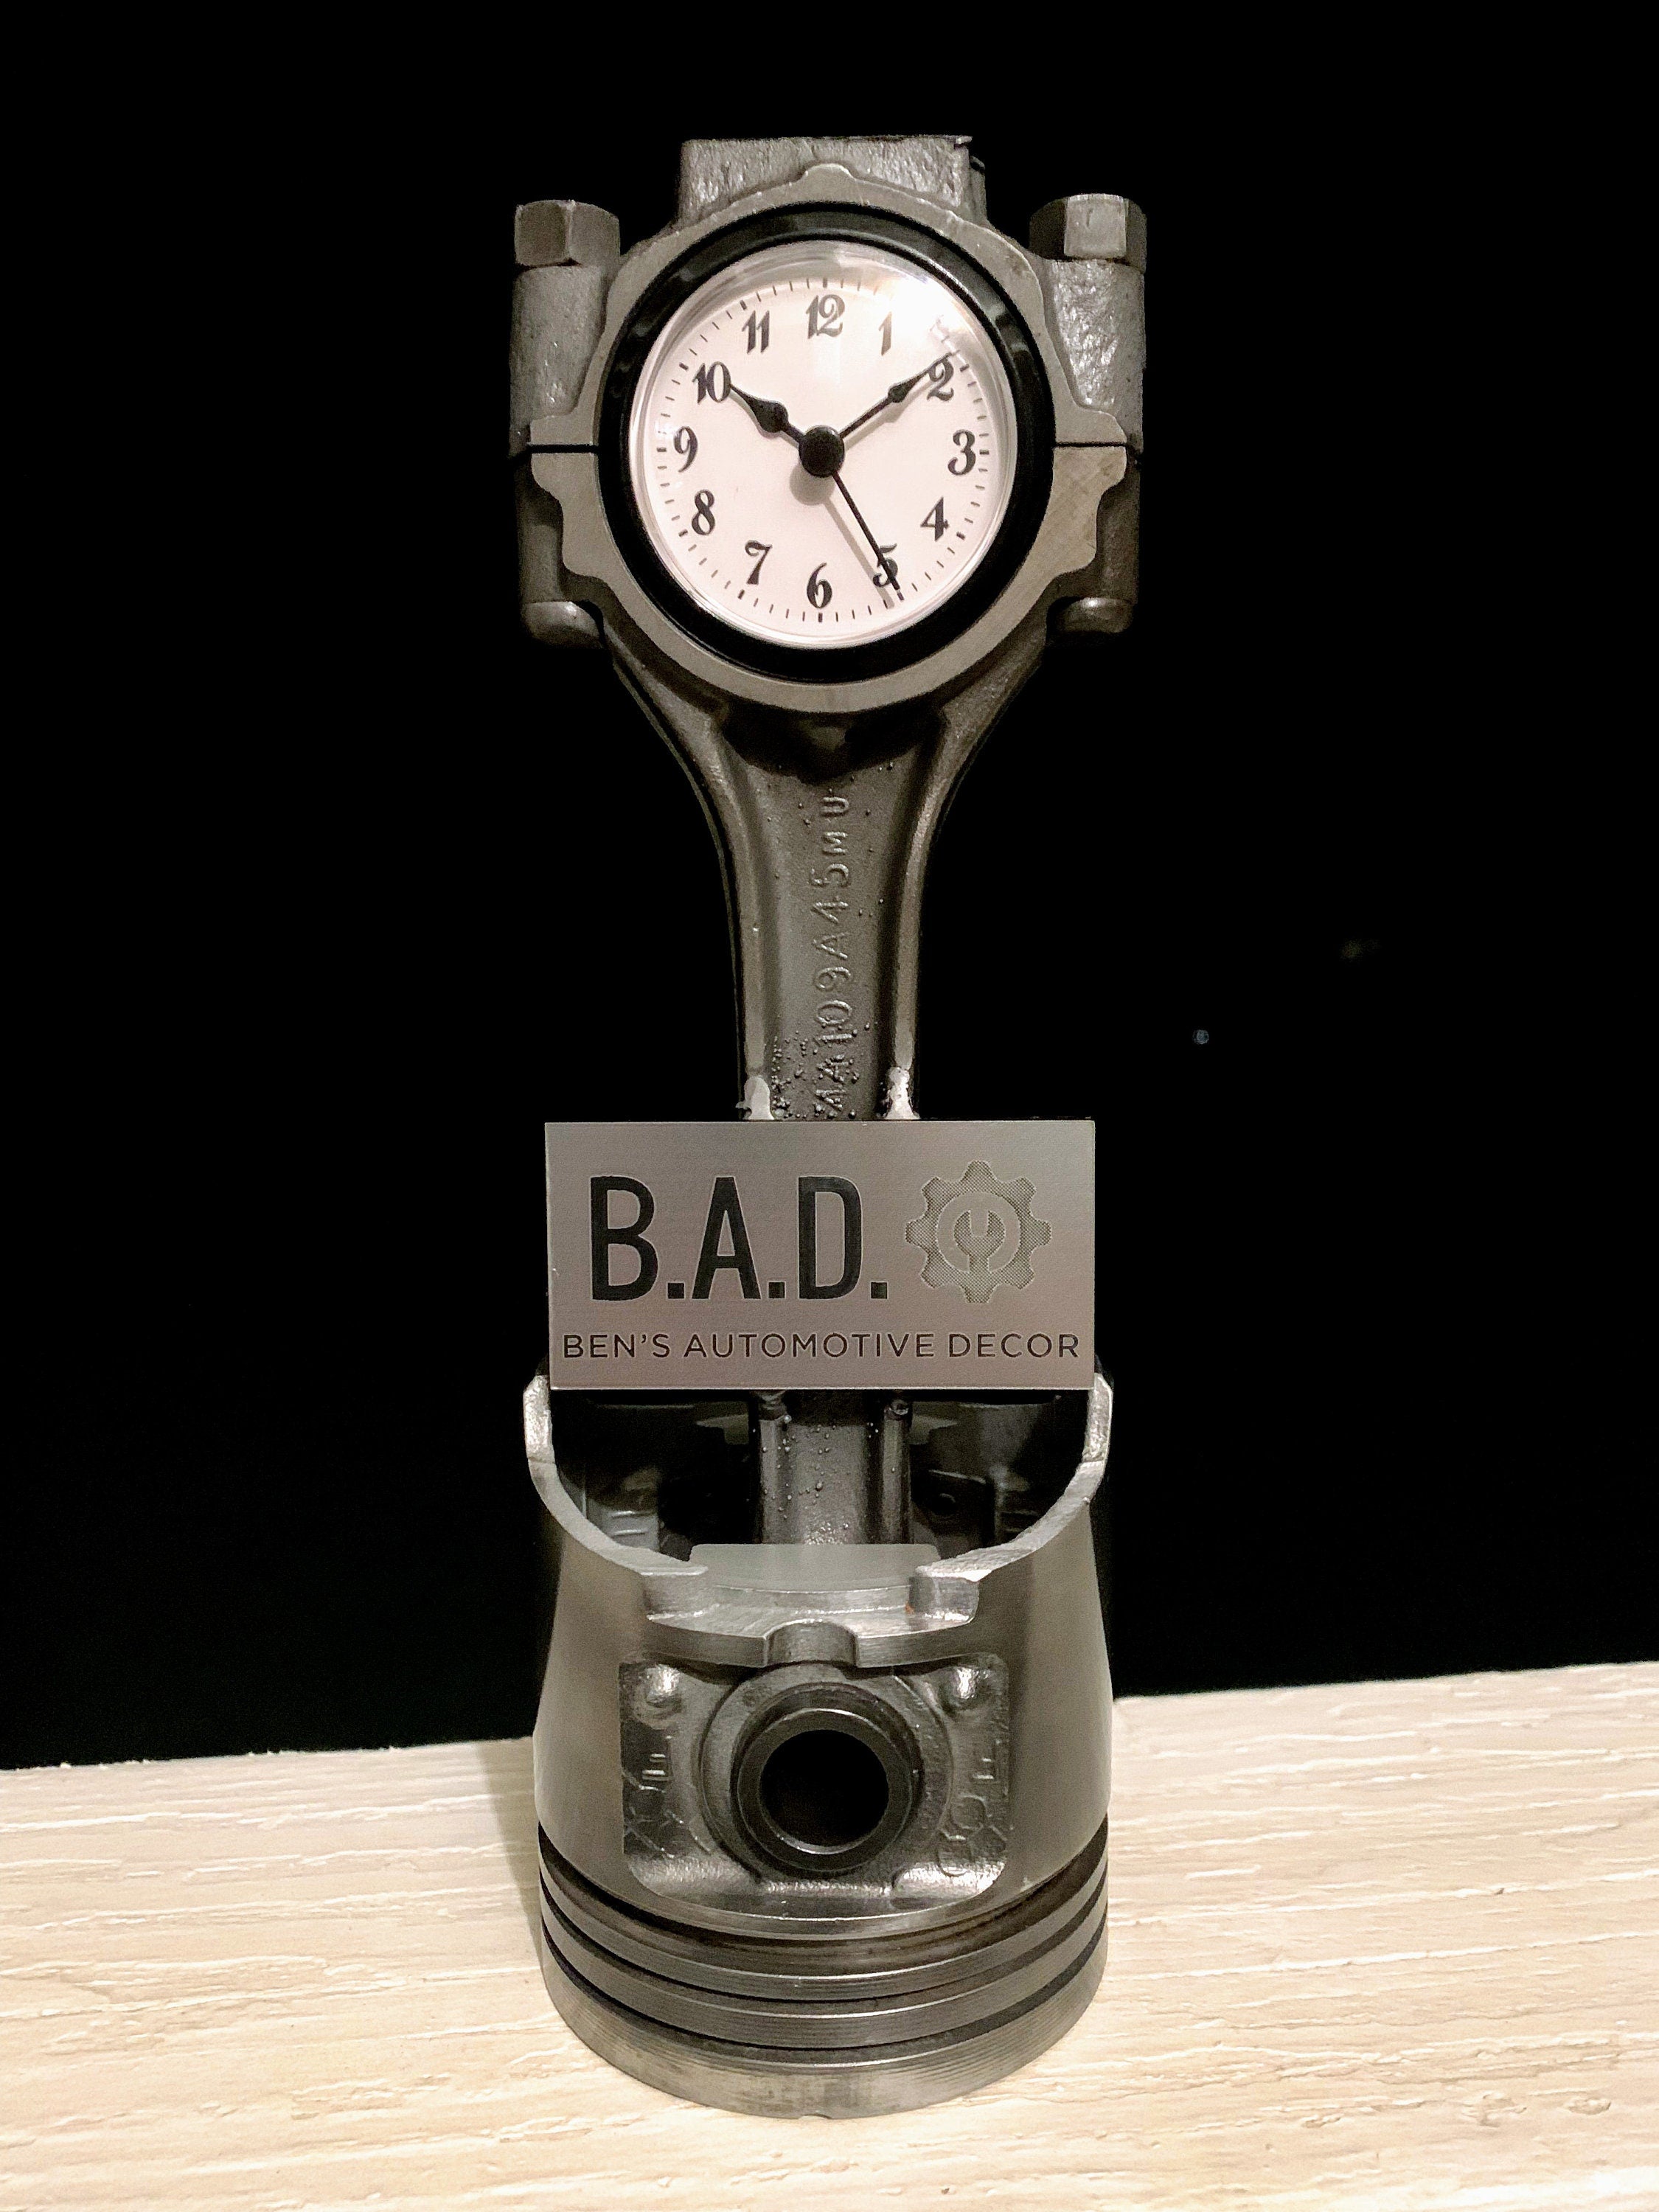 Clock made out of a car engine piston with a custom plaque, reading "B.A.D., Ben's Automotive Decor".